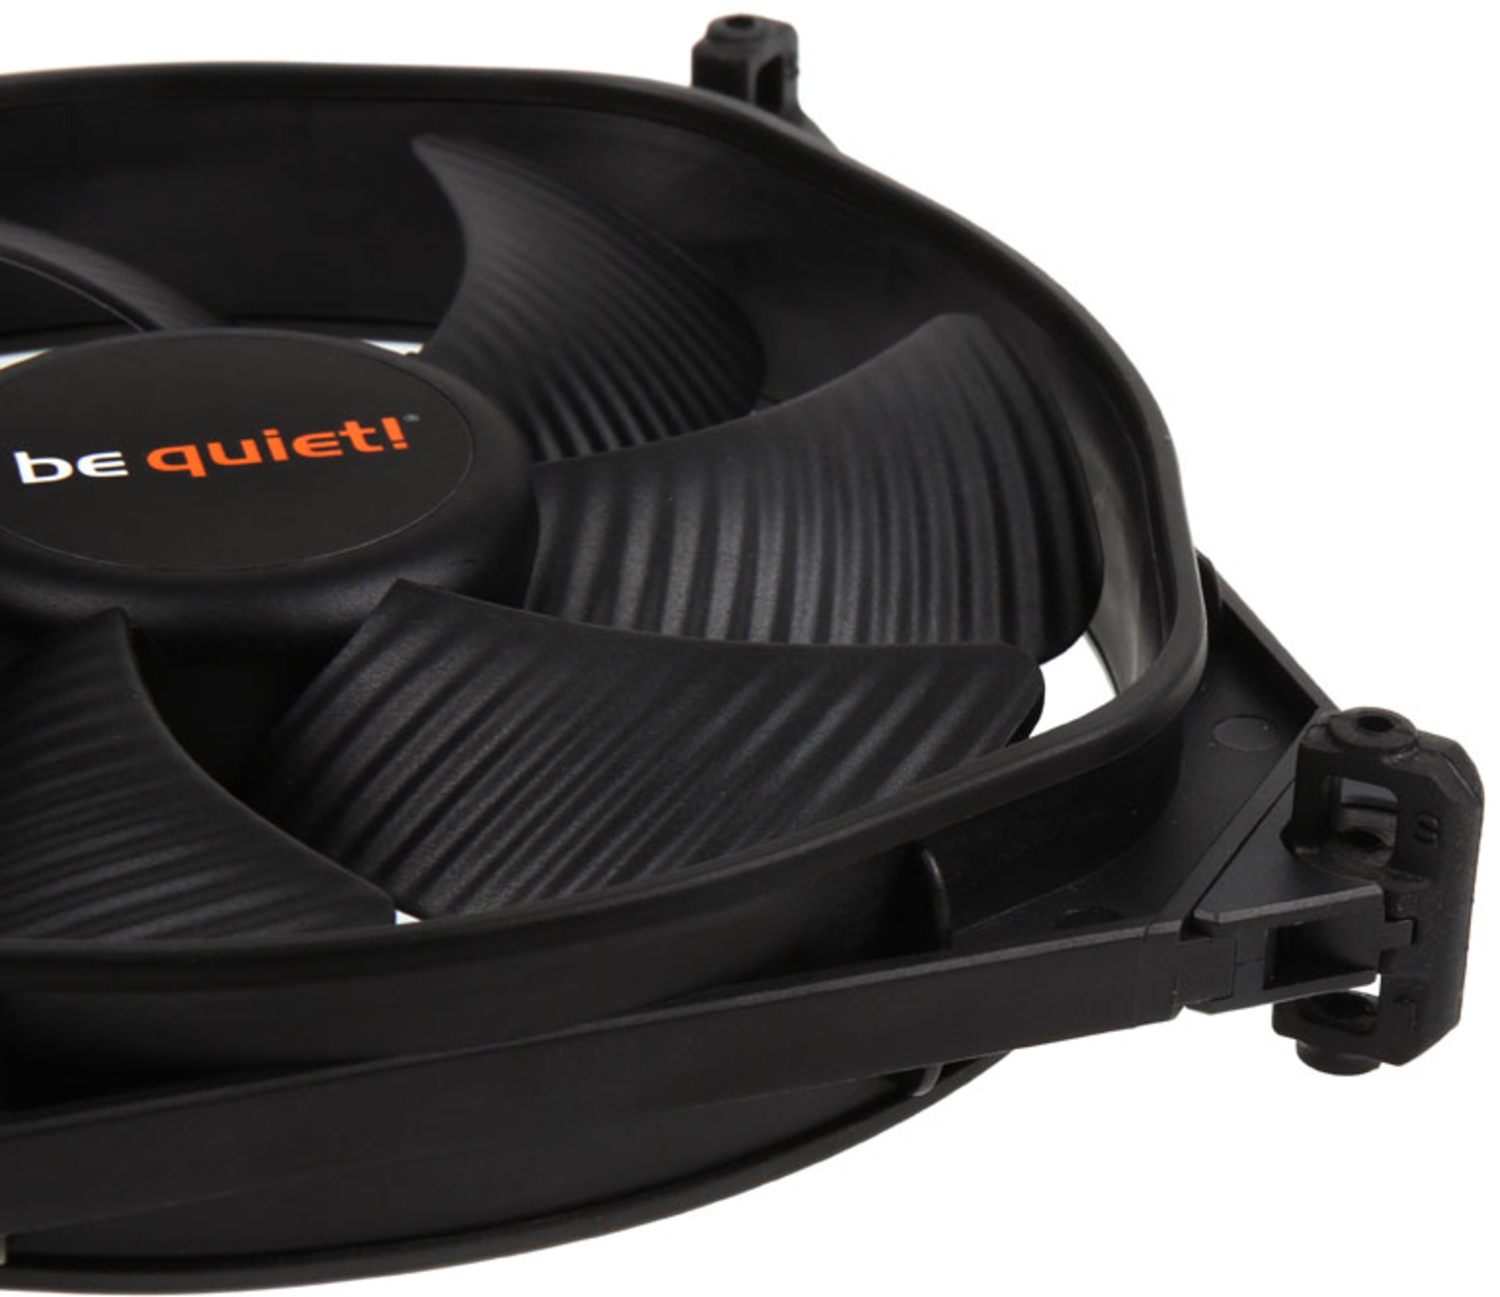 be quiet! - Ventoinha be quiet! Silent Wings 3 PWM High-Speed 140mm